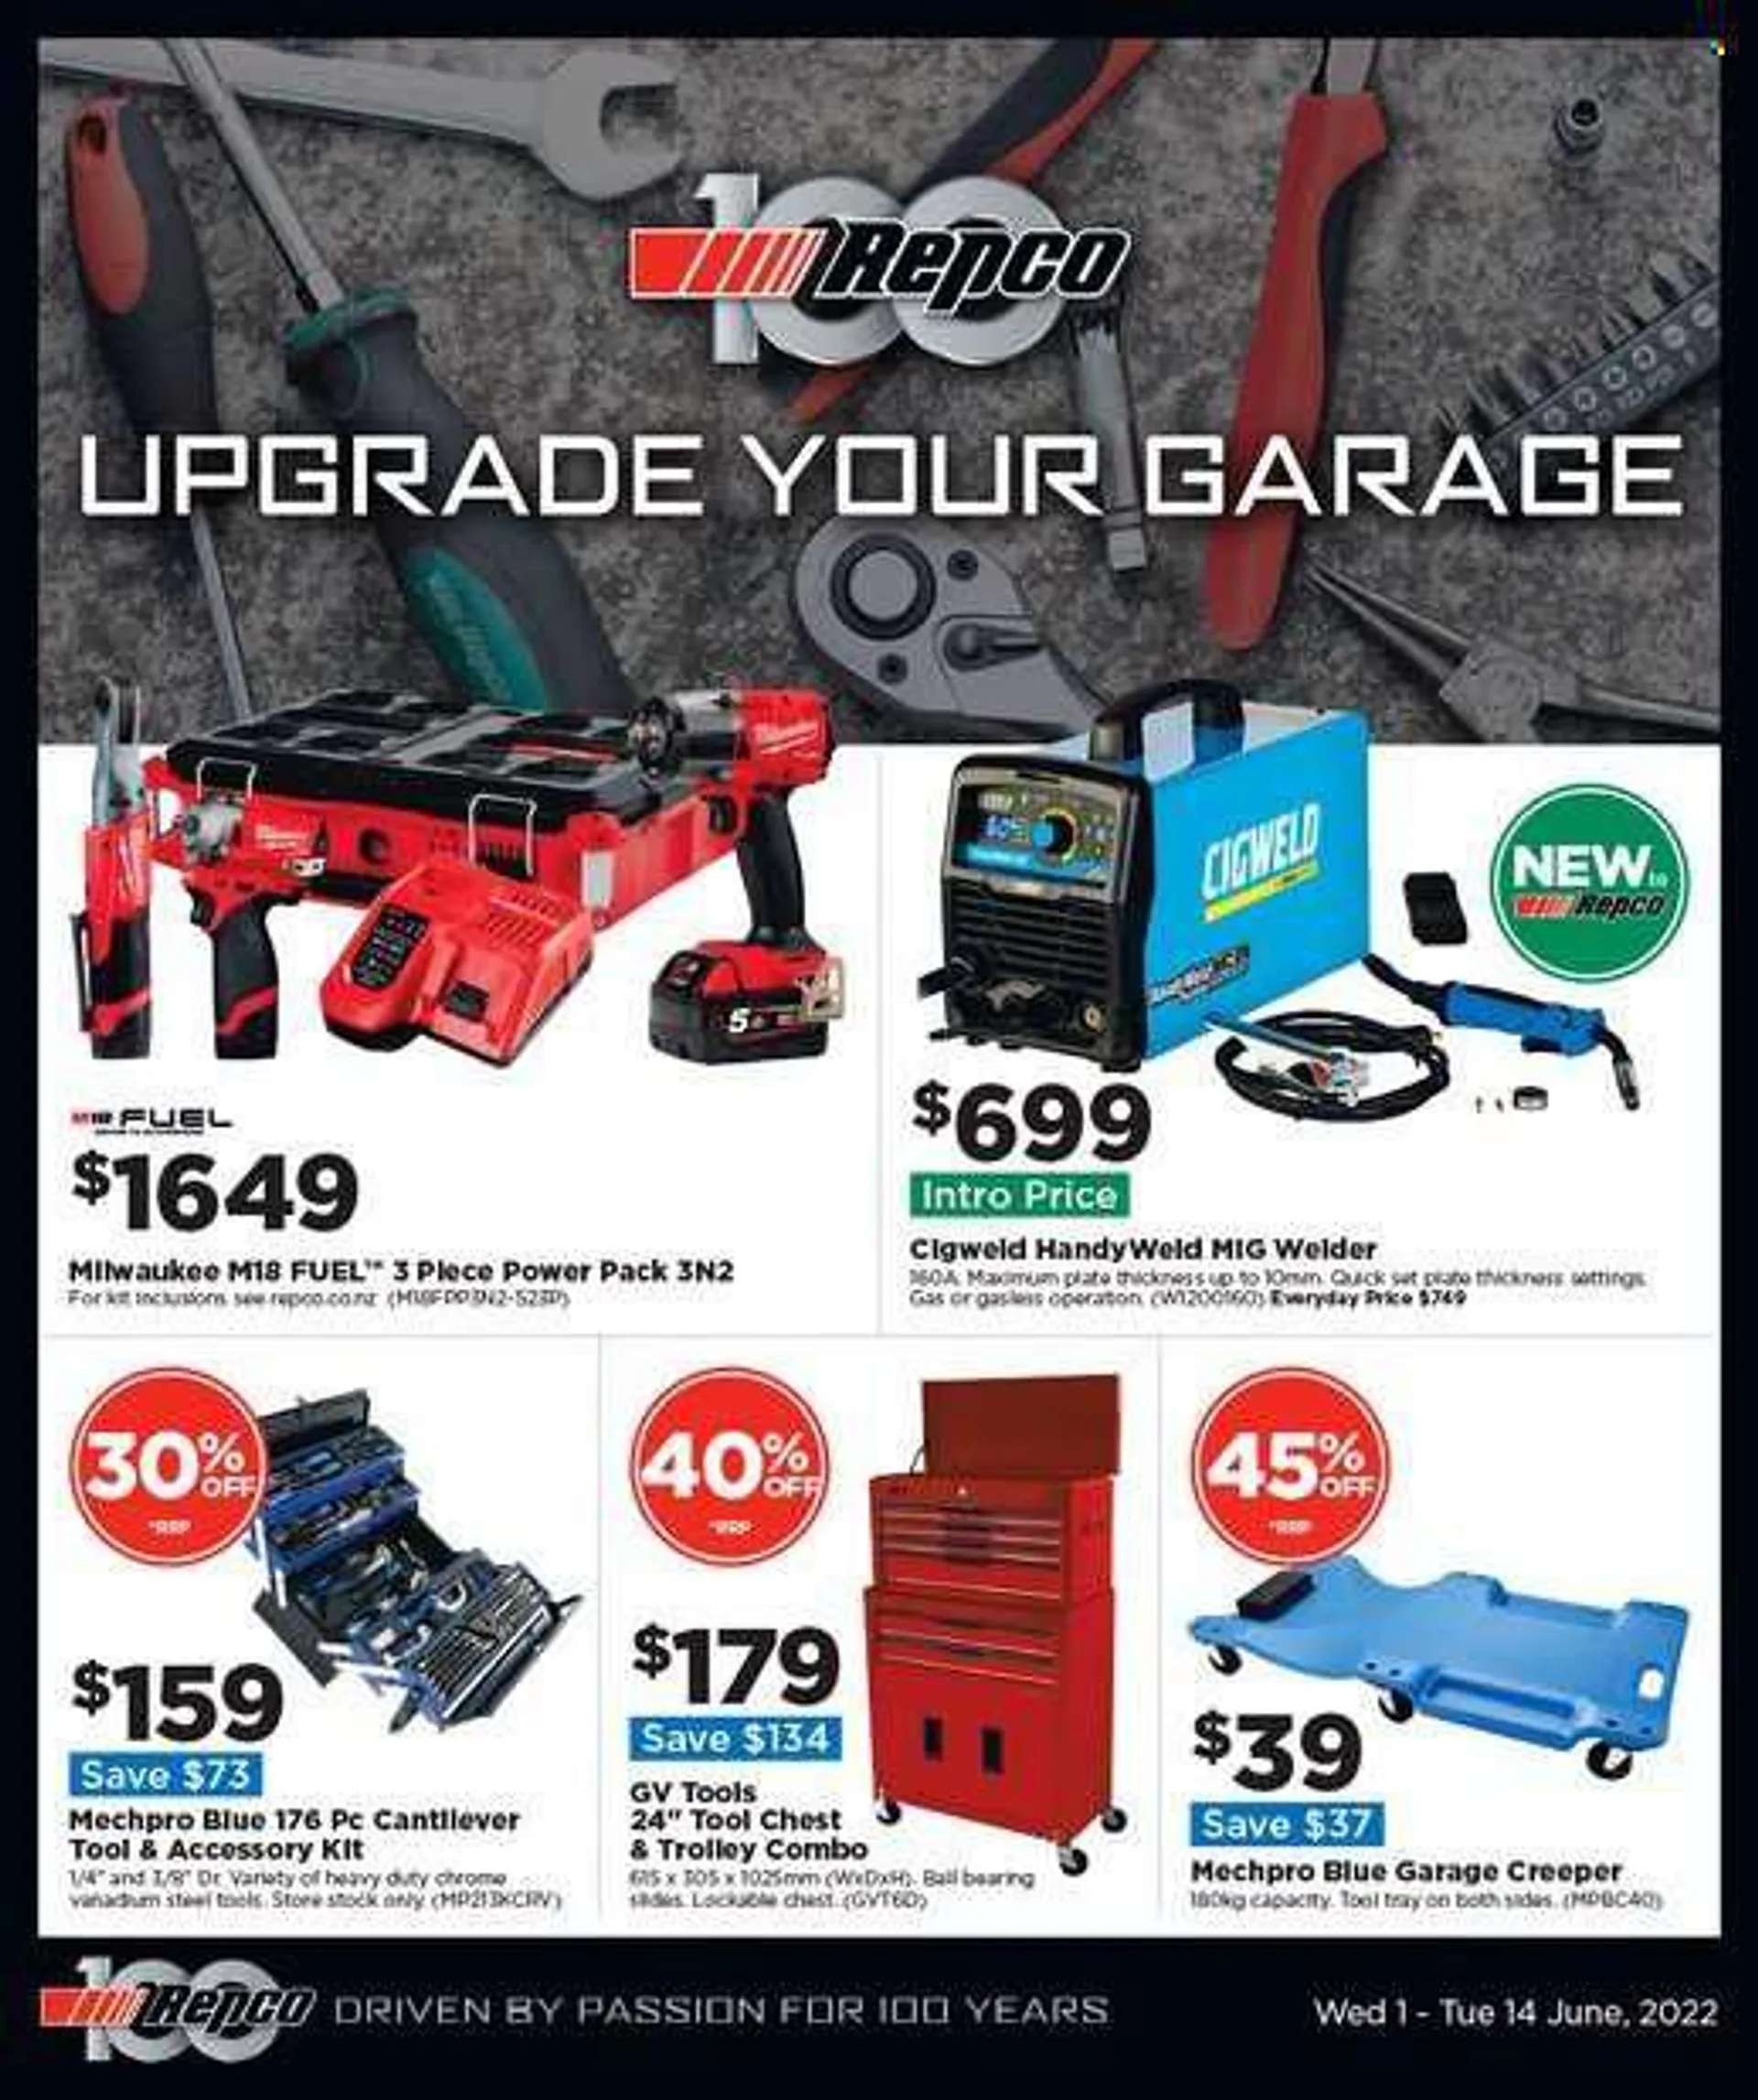 Repco mailer - 01.06.2022 - 14.06.2022. - 1 June 14 June 2022 - Page 1